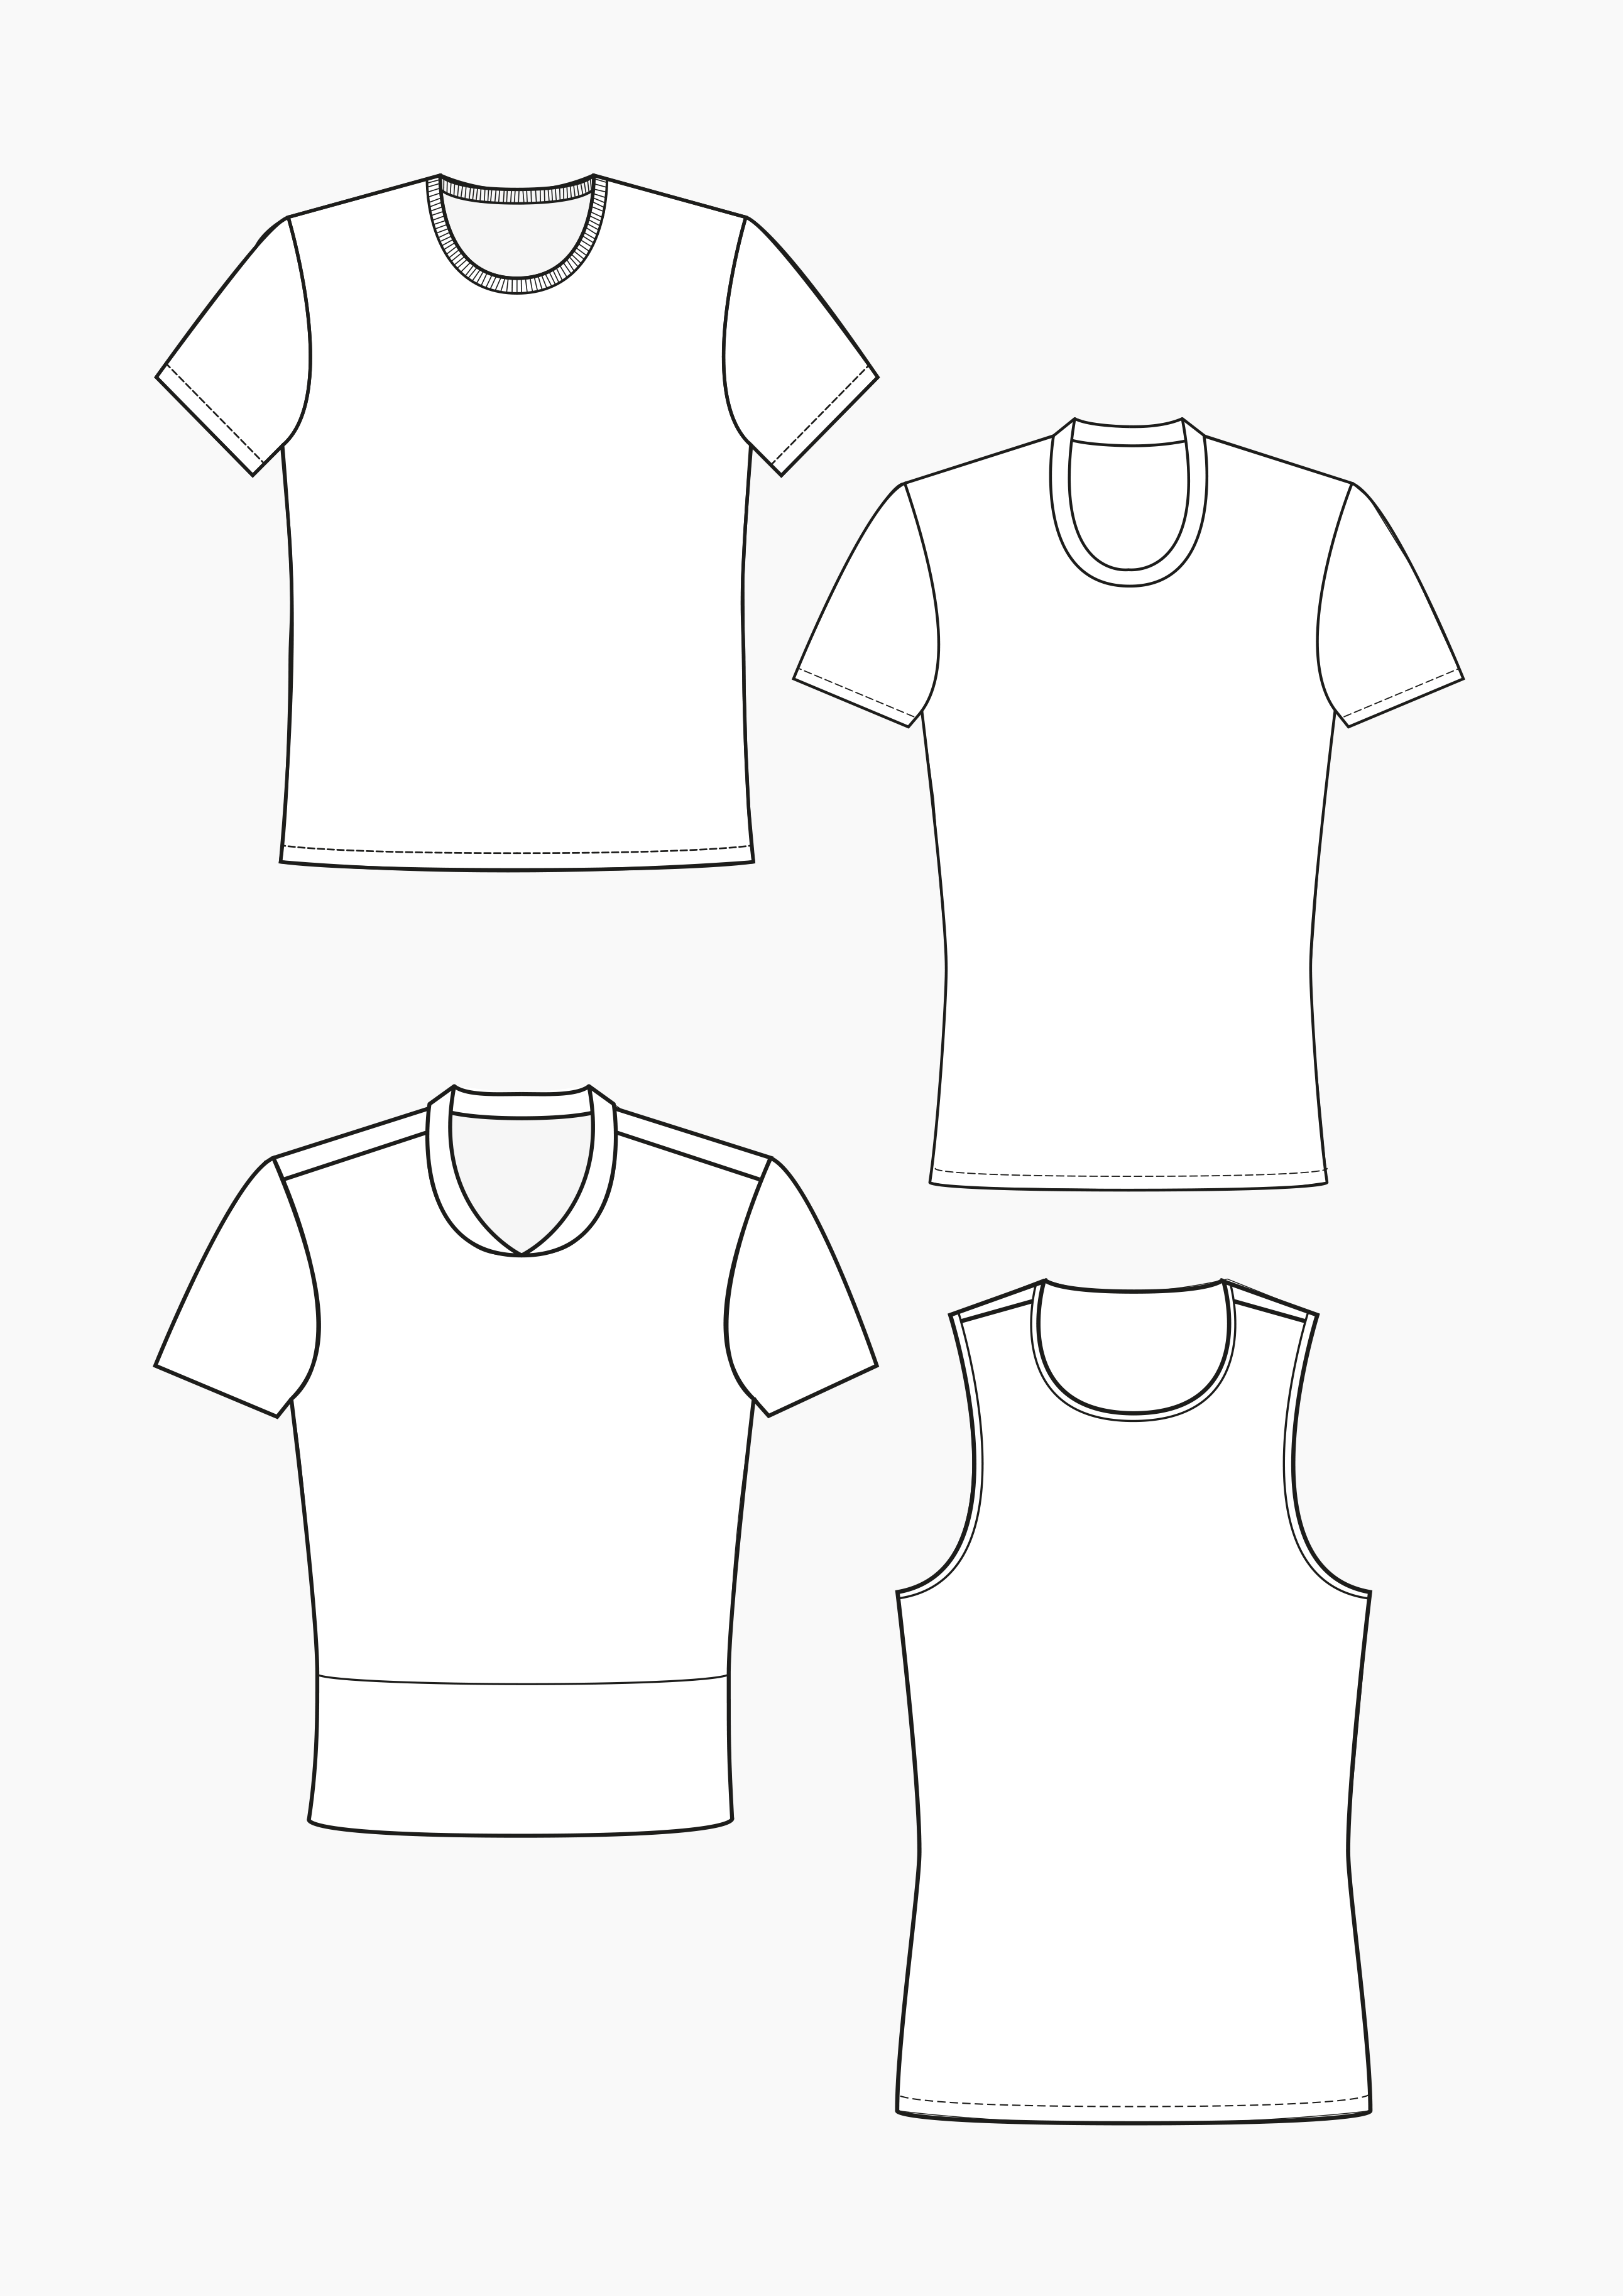 Product: Pattern Making T-Shirts and Tops for Men